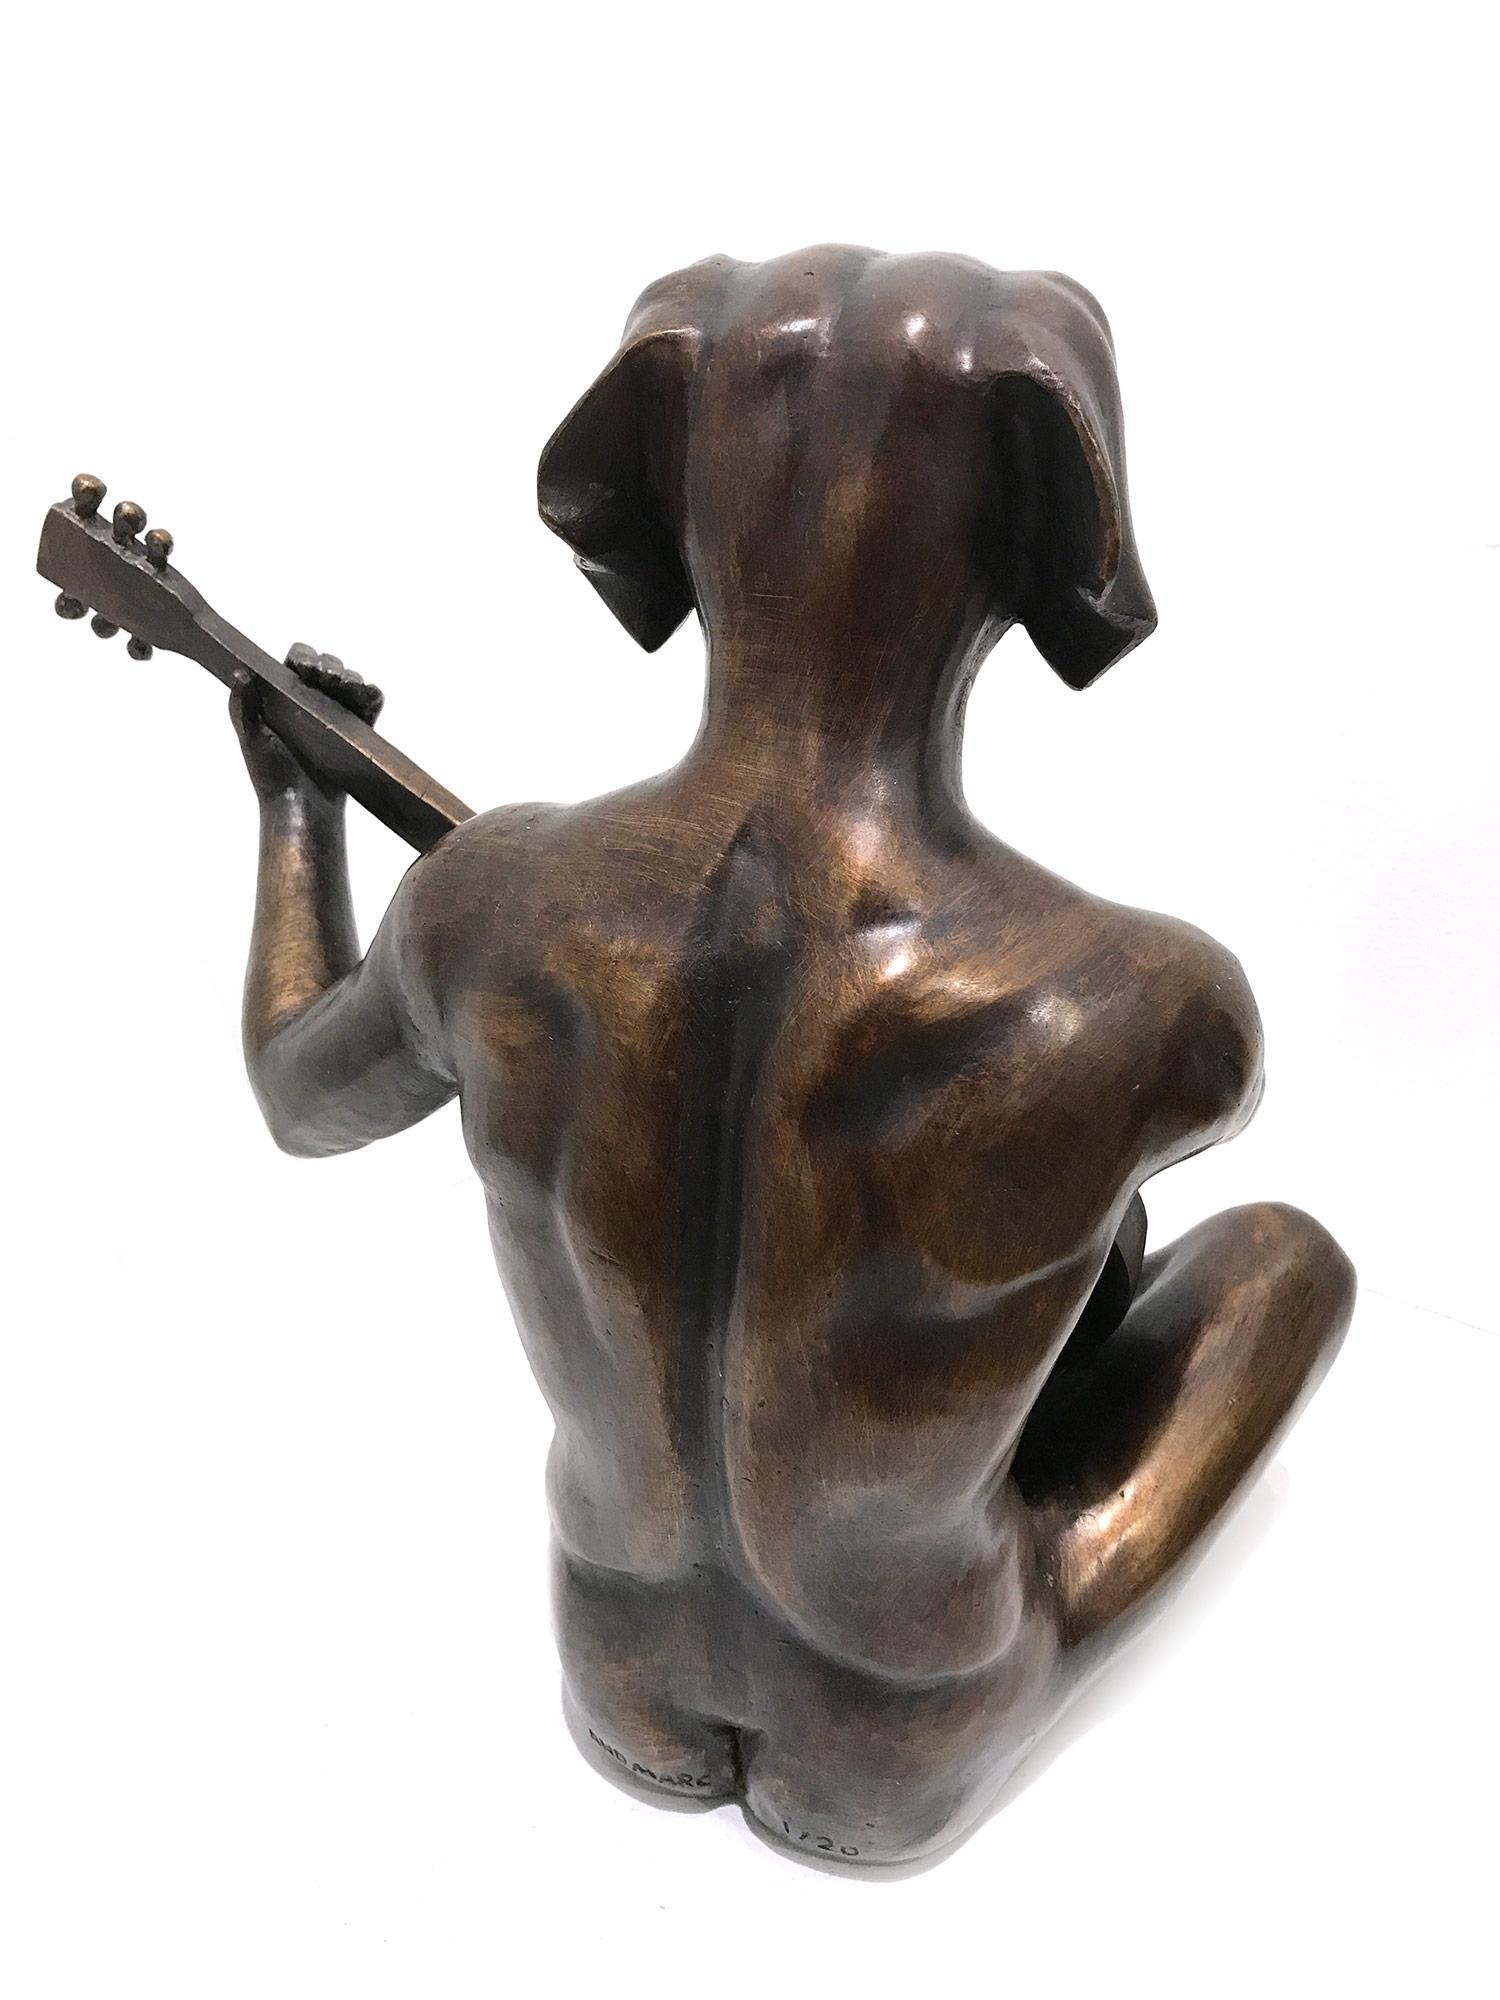 A whimsical yet very strong piece depicting the Dog Man from Gillie and Marc's iconic figures of the Dog/Bunny Human Hybrid, which has picked up much esteem across the globe. Here we find Dog Man seated while playing the guitar. The artists want to